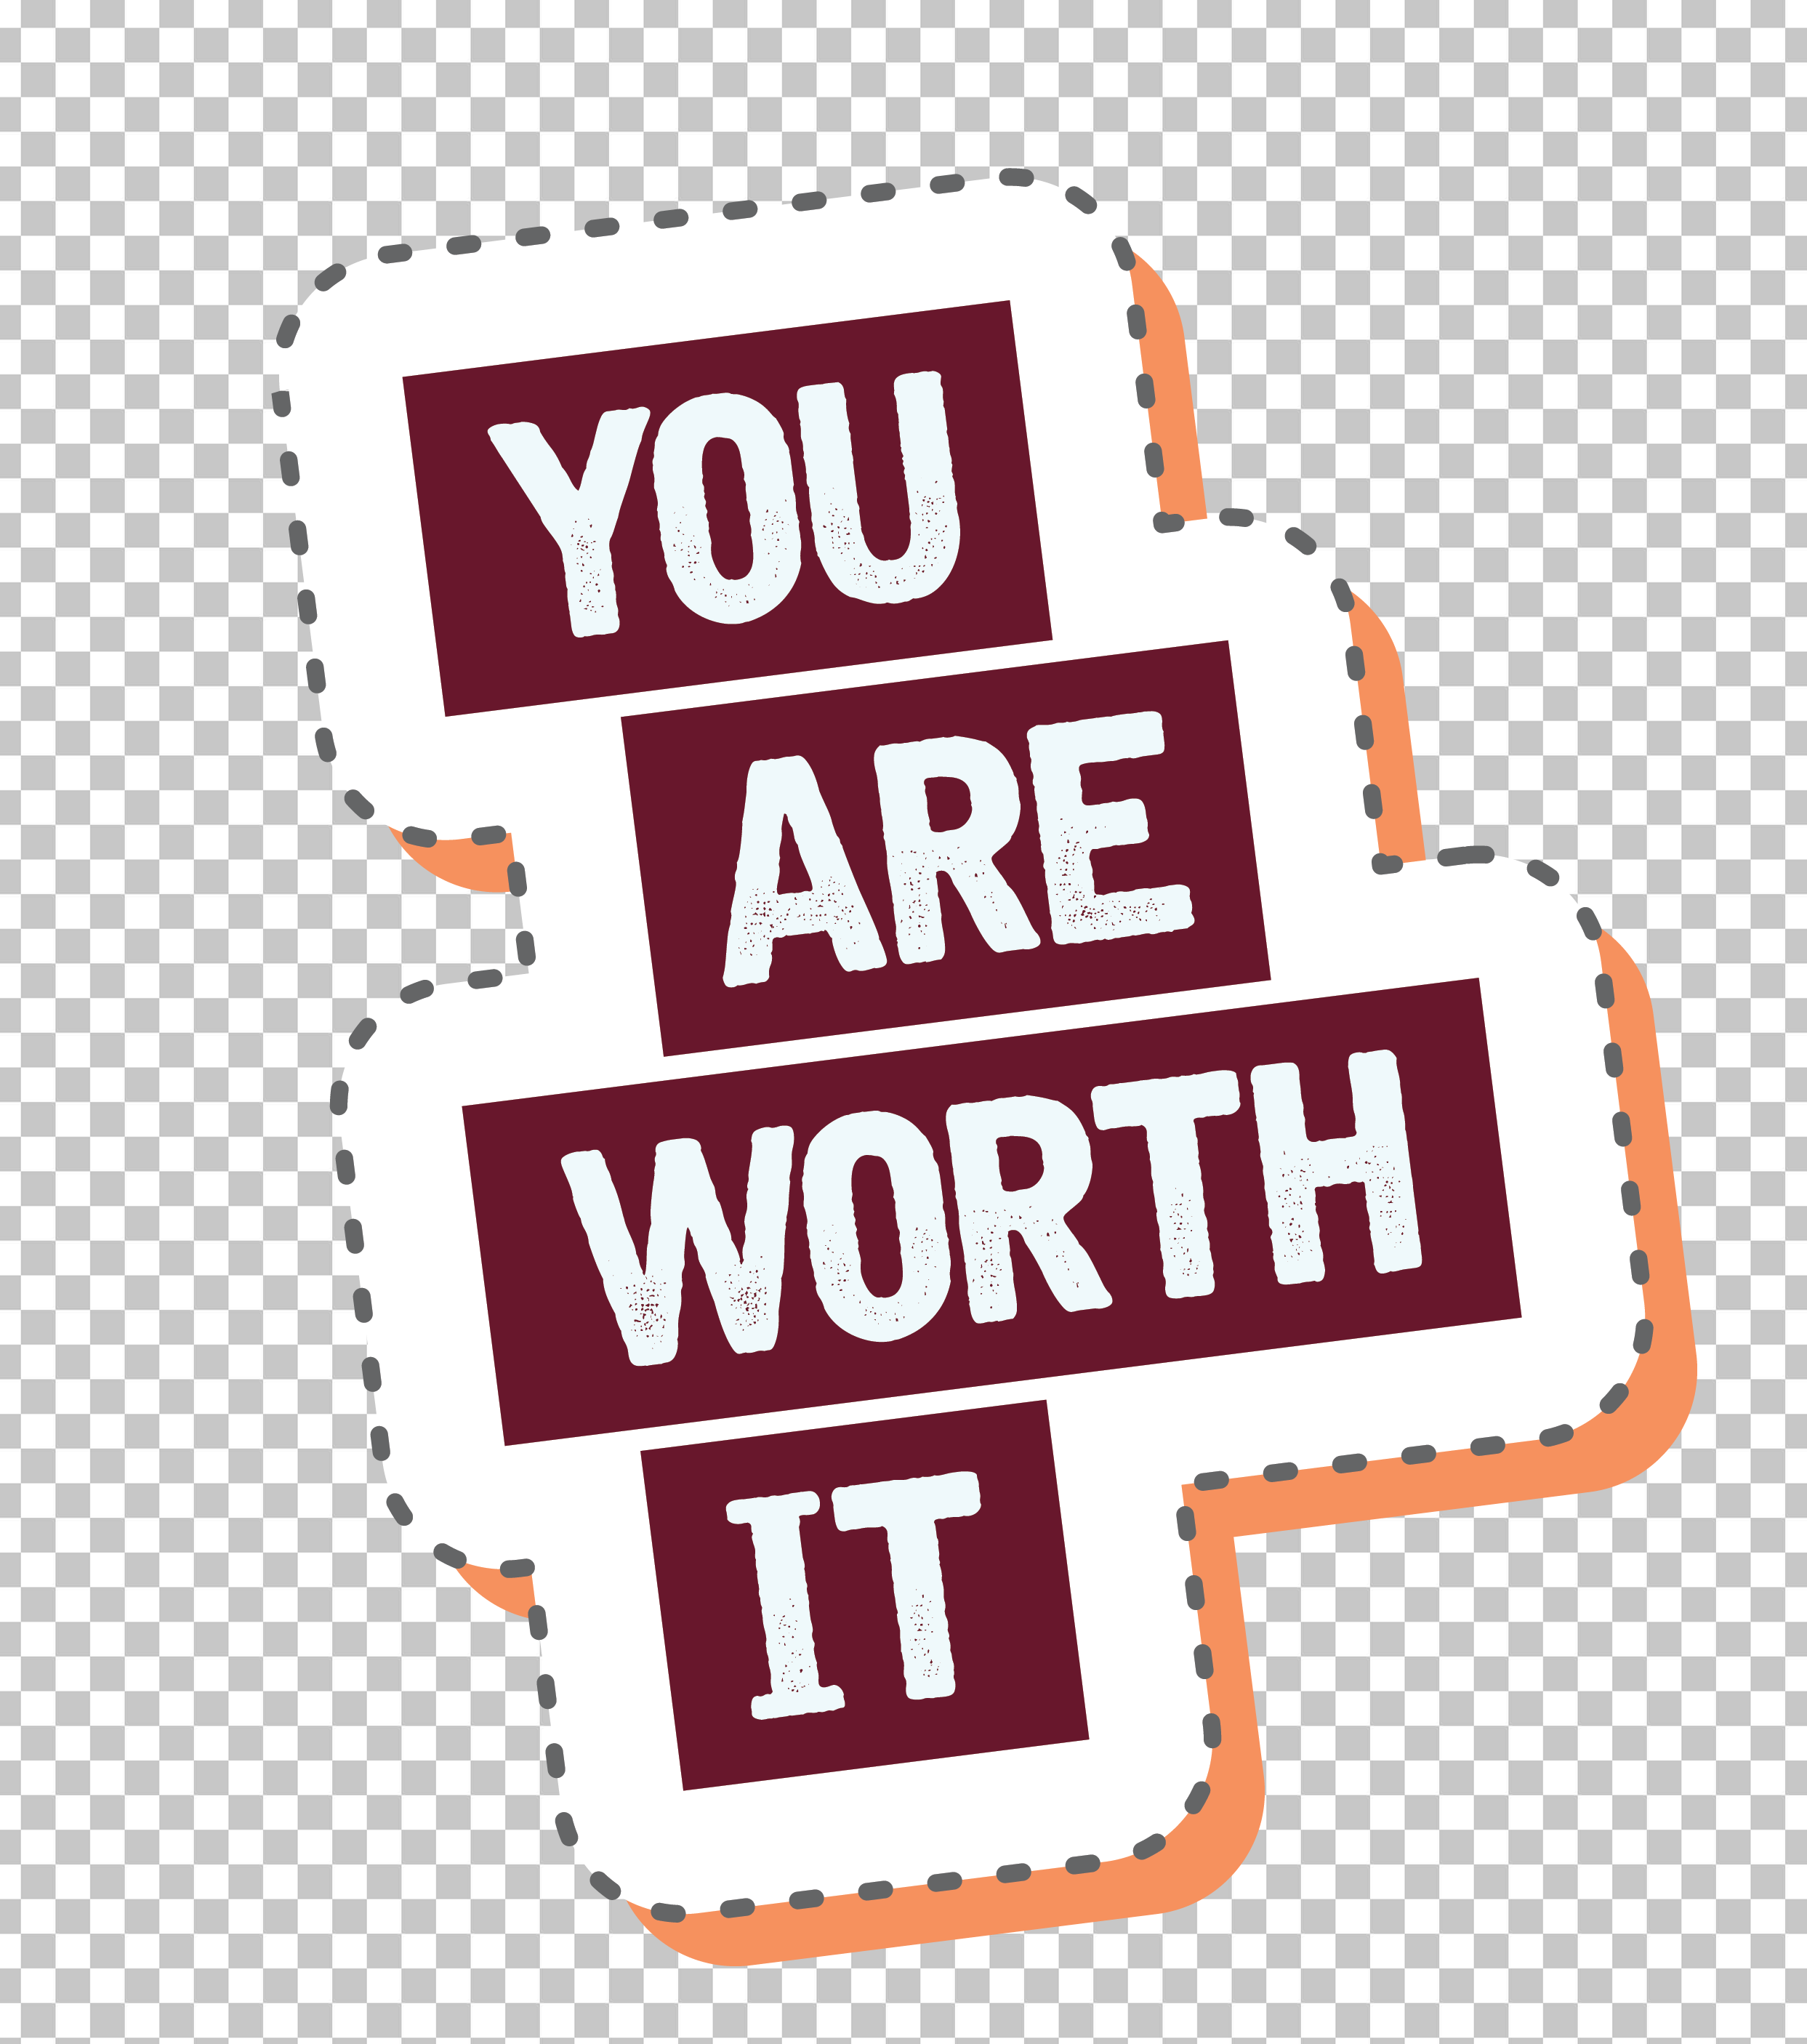 YOU ARE WORTH IT Sticker PNG Image.